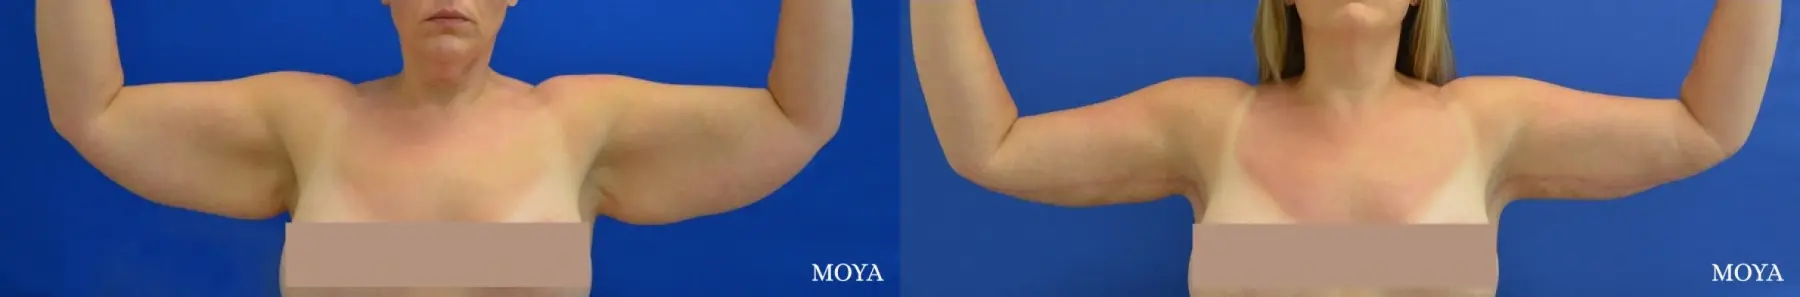 Arm Lift (MAJOR: inseam) - Before and After 1